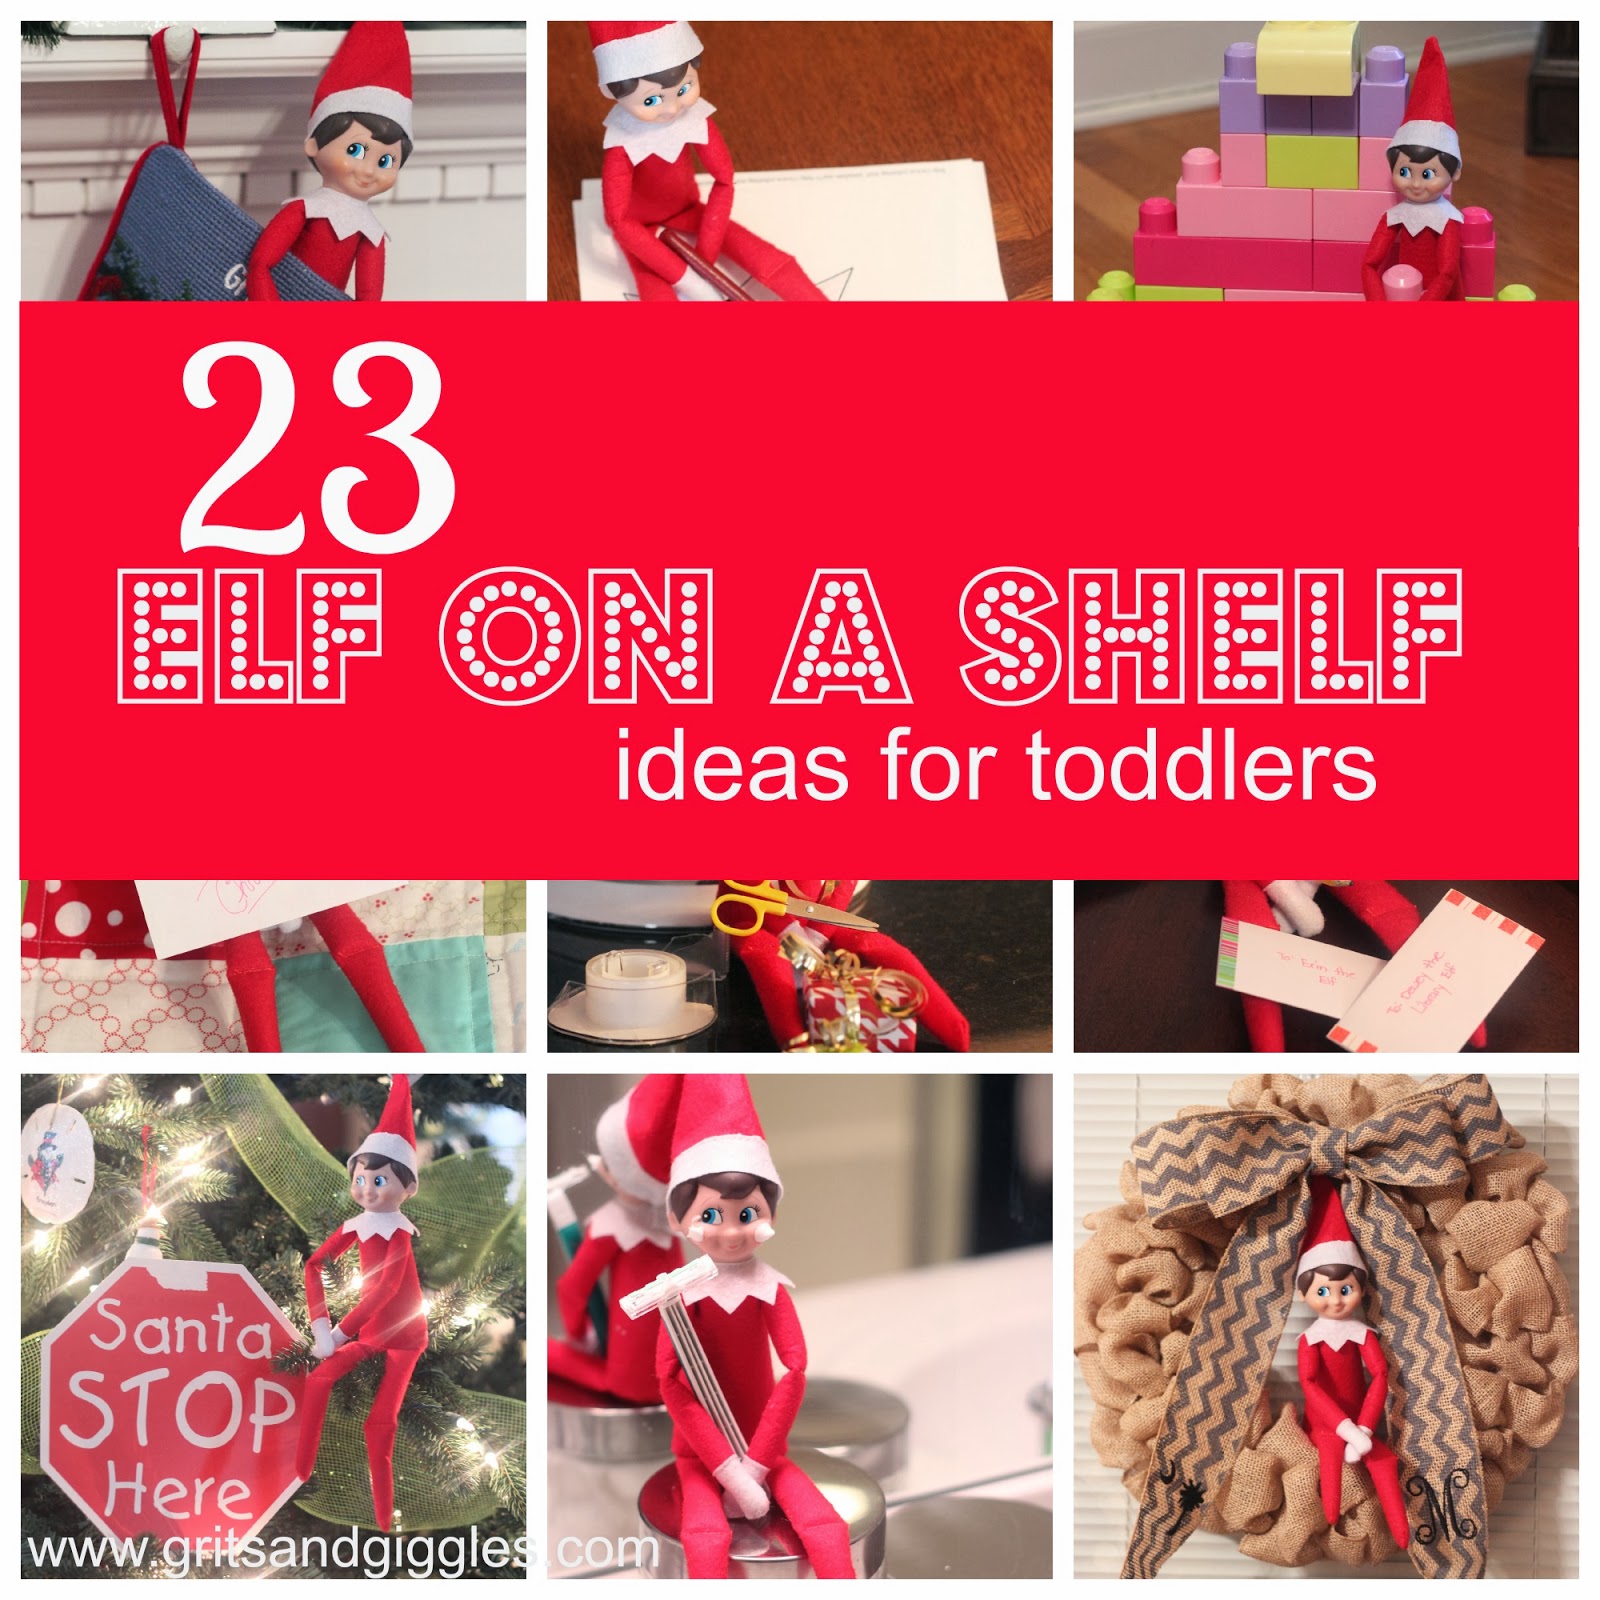 Grits & Giggles: Elf on a Shelf: for toddlers